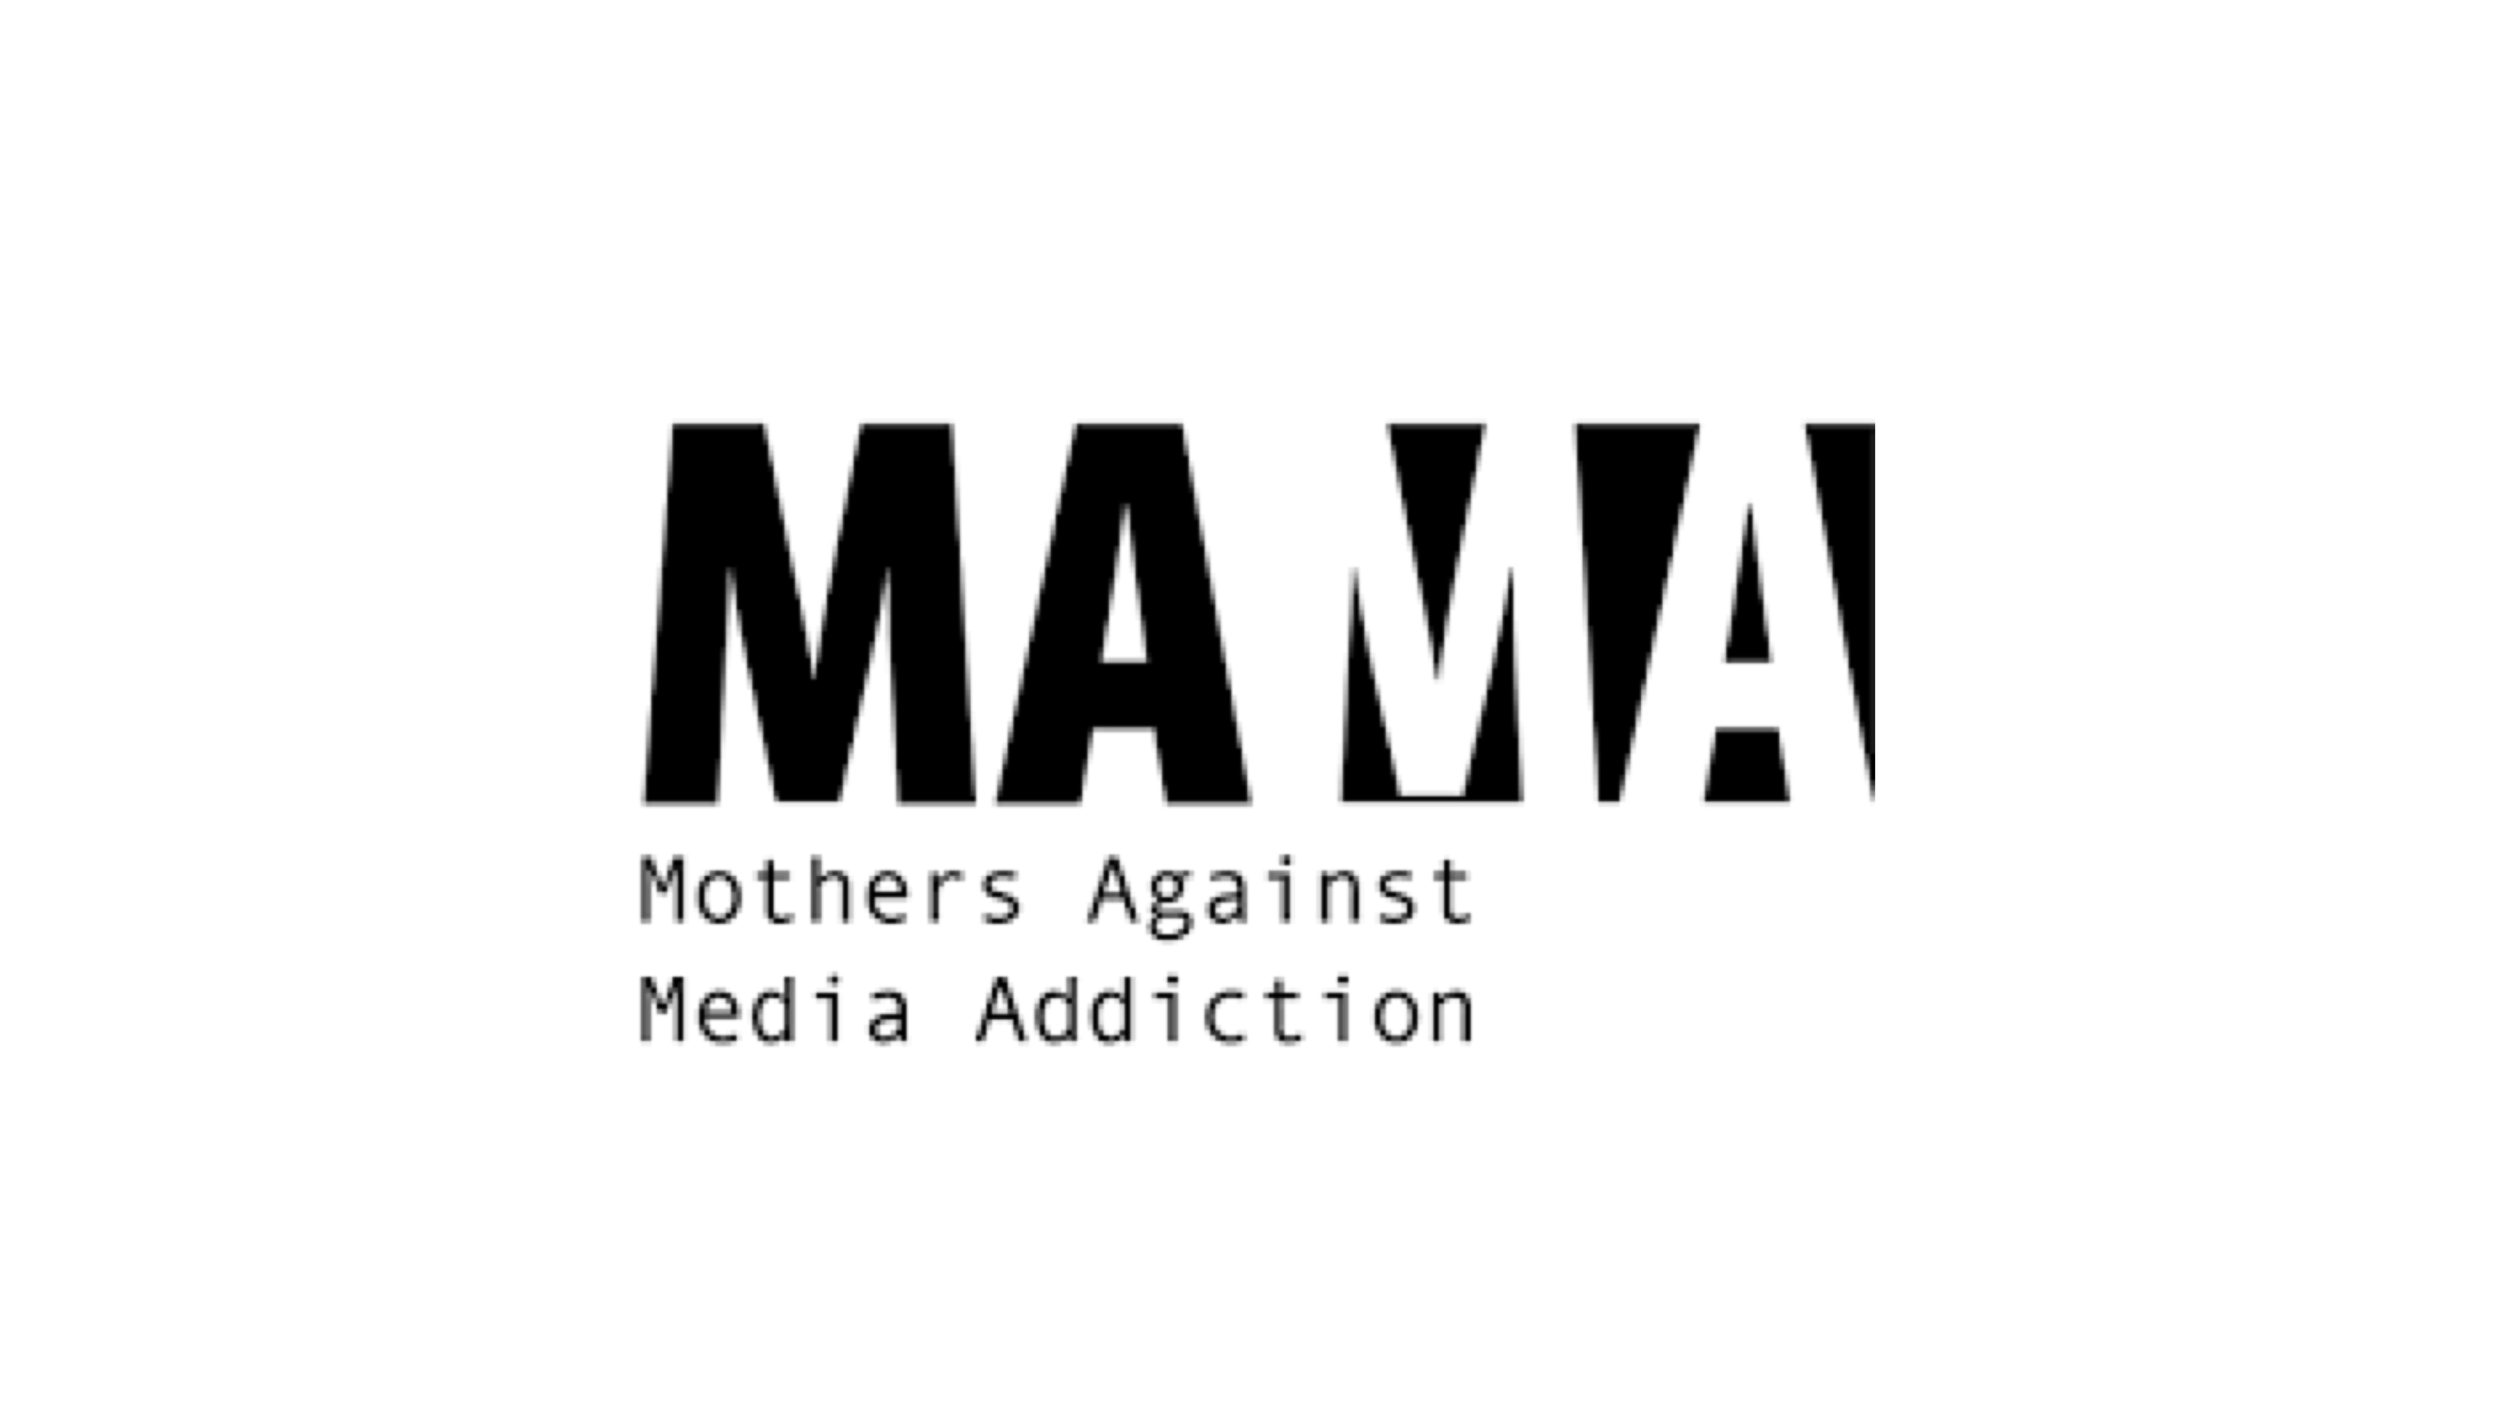 Mothers Against Media Addiction